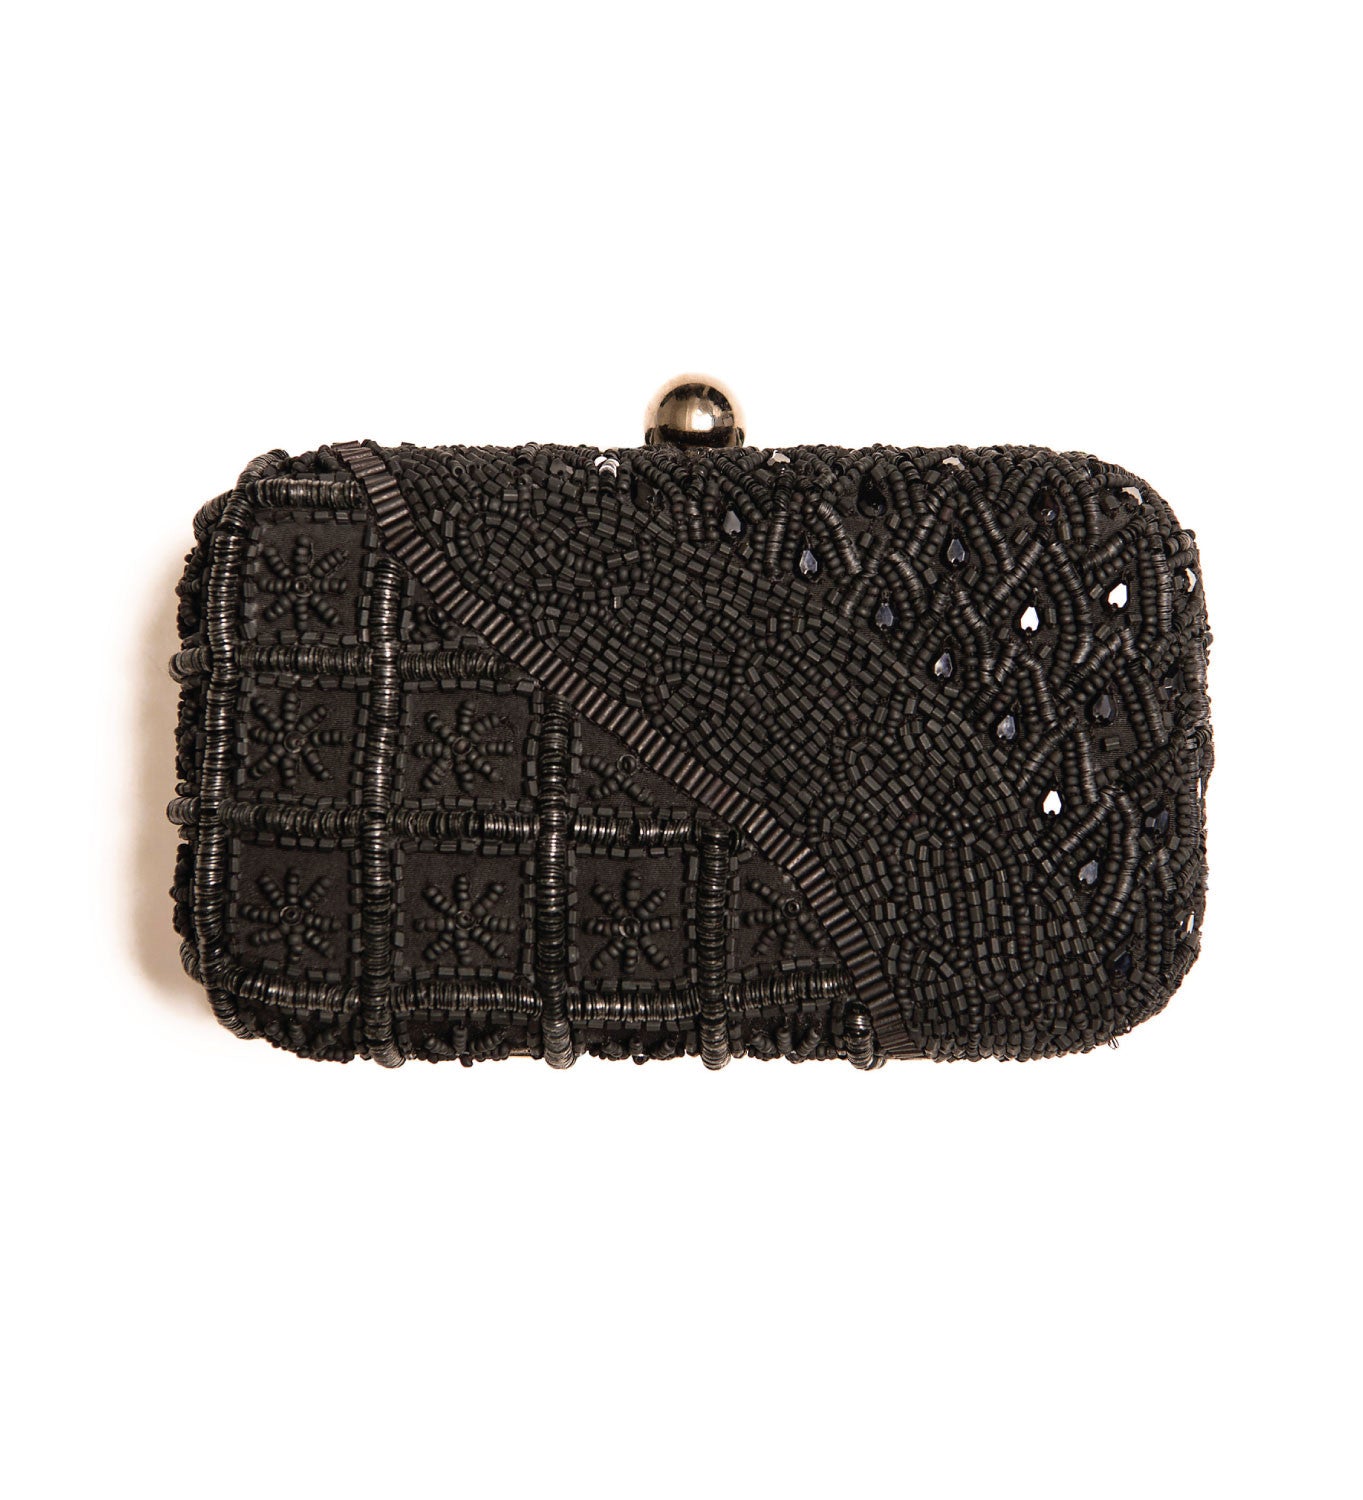 Hand-Beaded Clutch Bag with Detachable Chain Strap